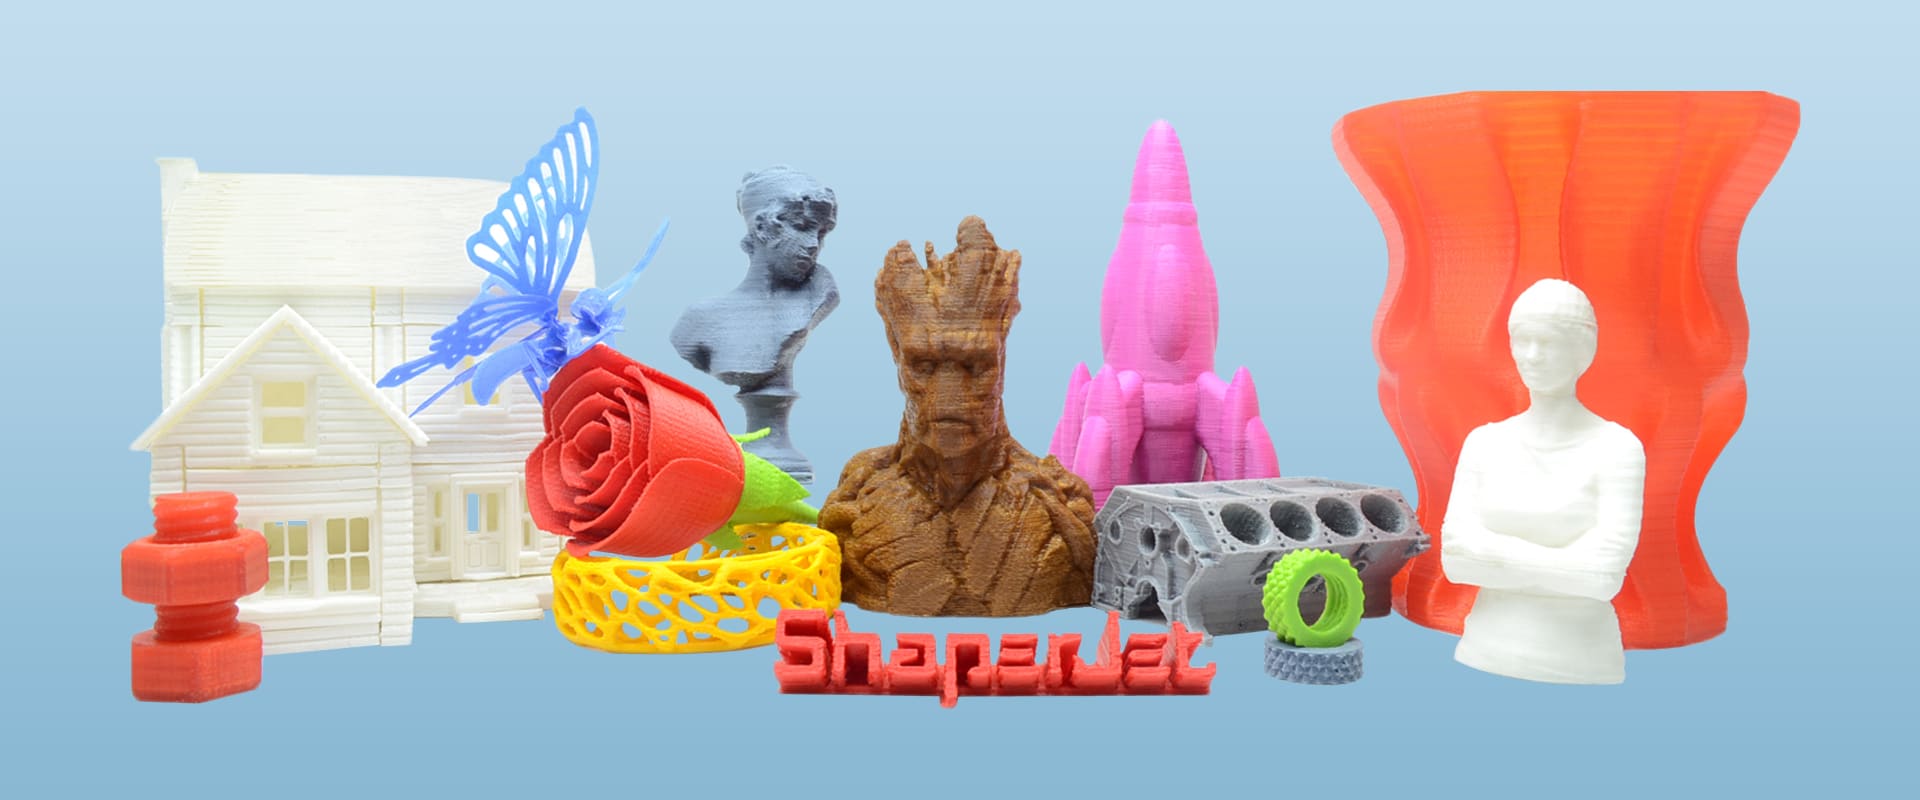 10 Cool Things to 3D Print (Updated April 2021)